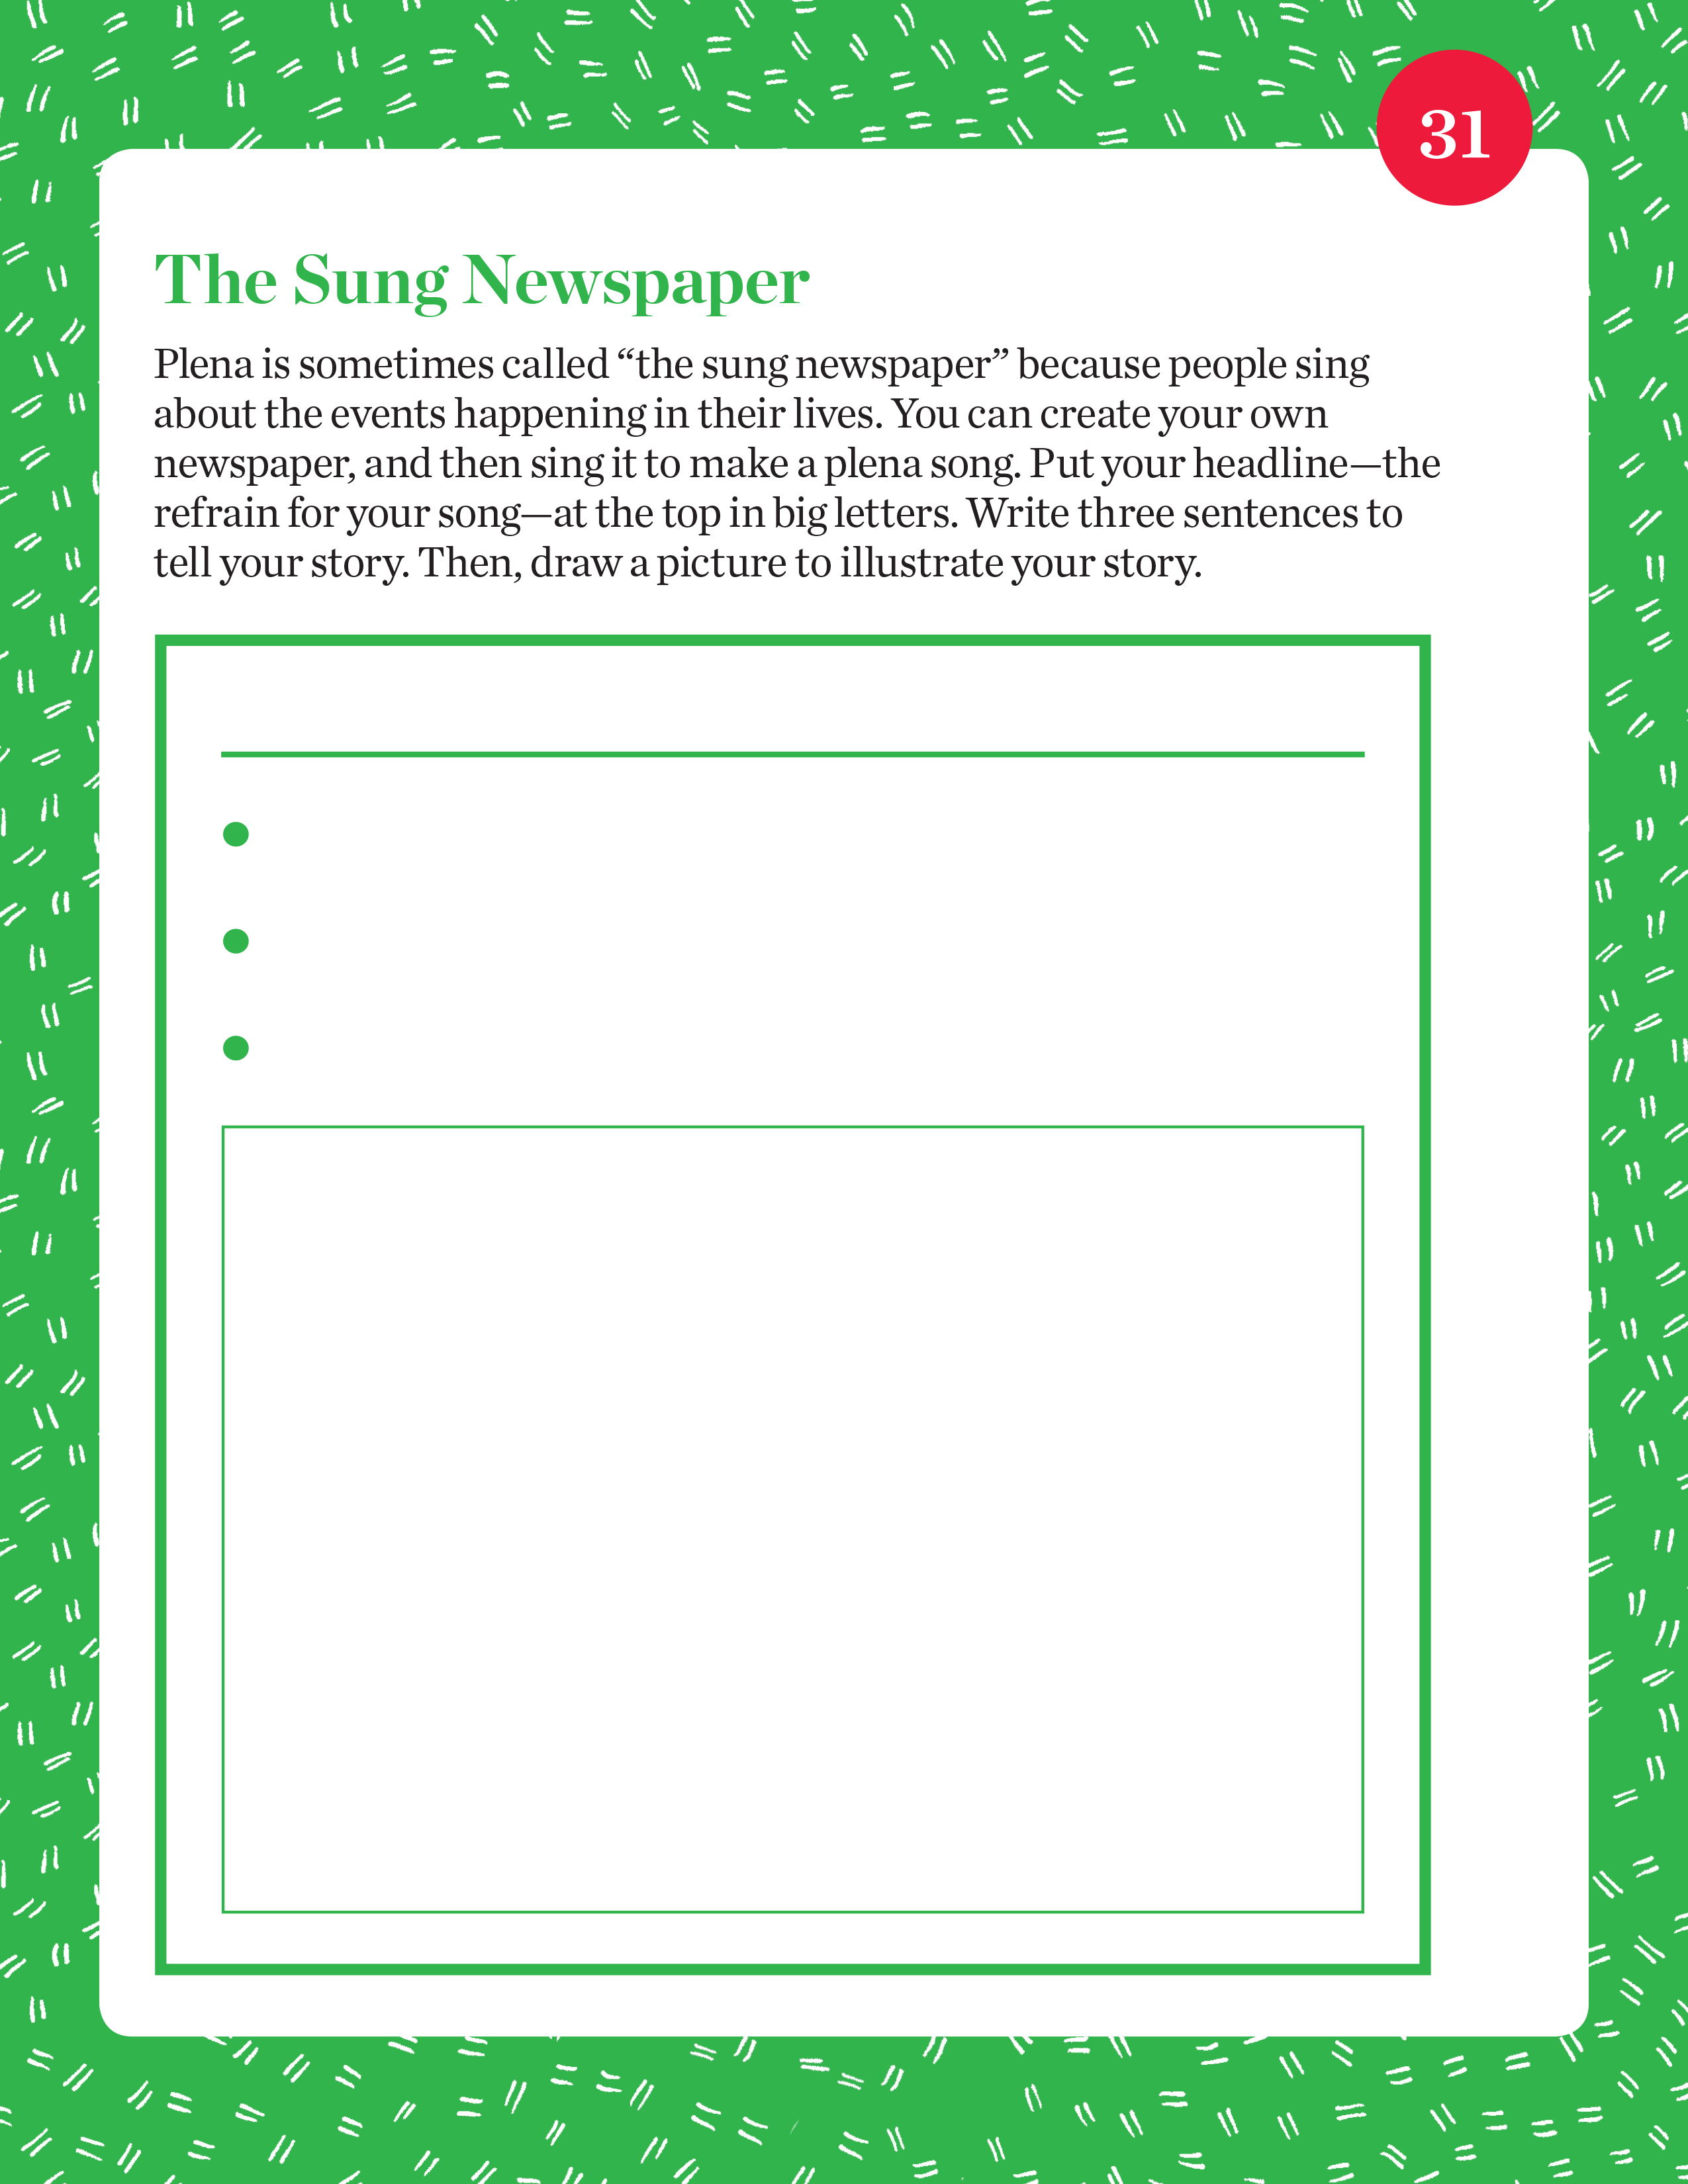 The Sung Newspaper